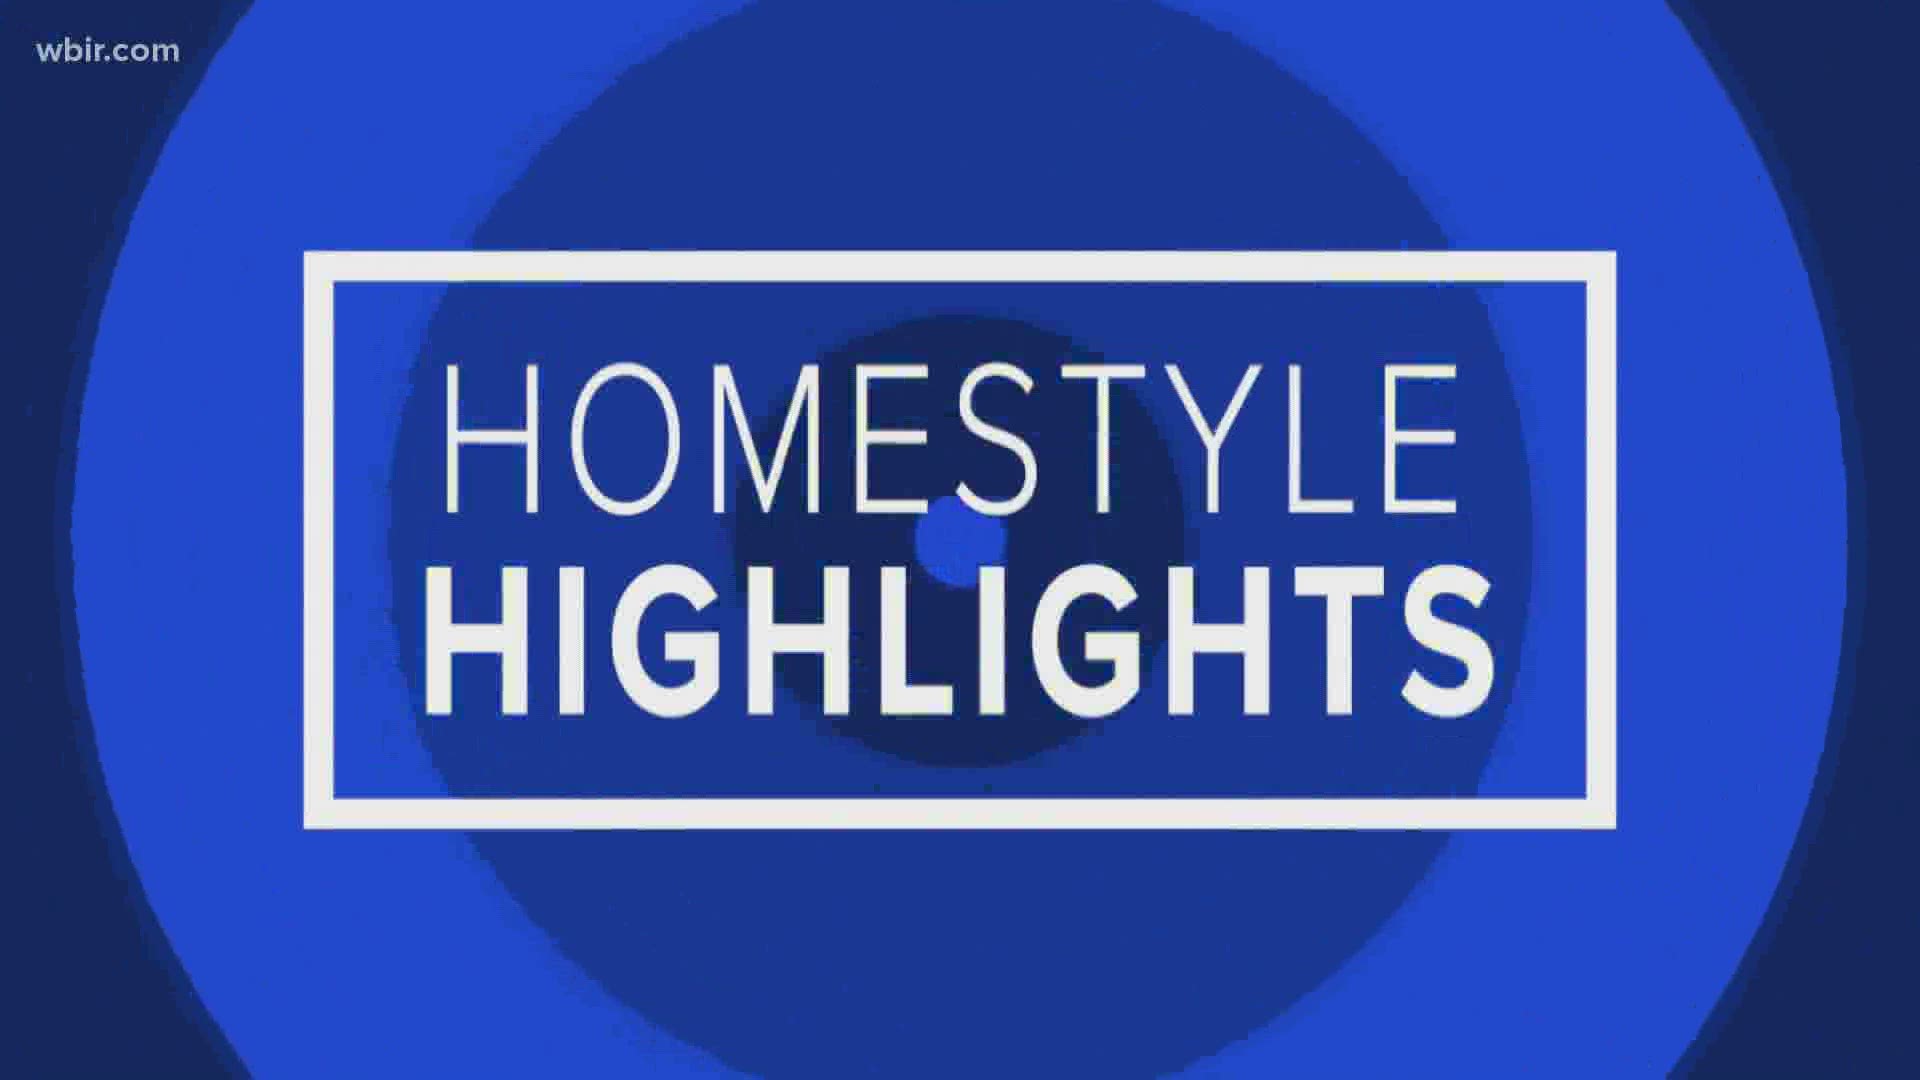 Here are your Homestyle Highlights for the morning of May 29.